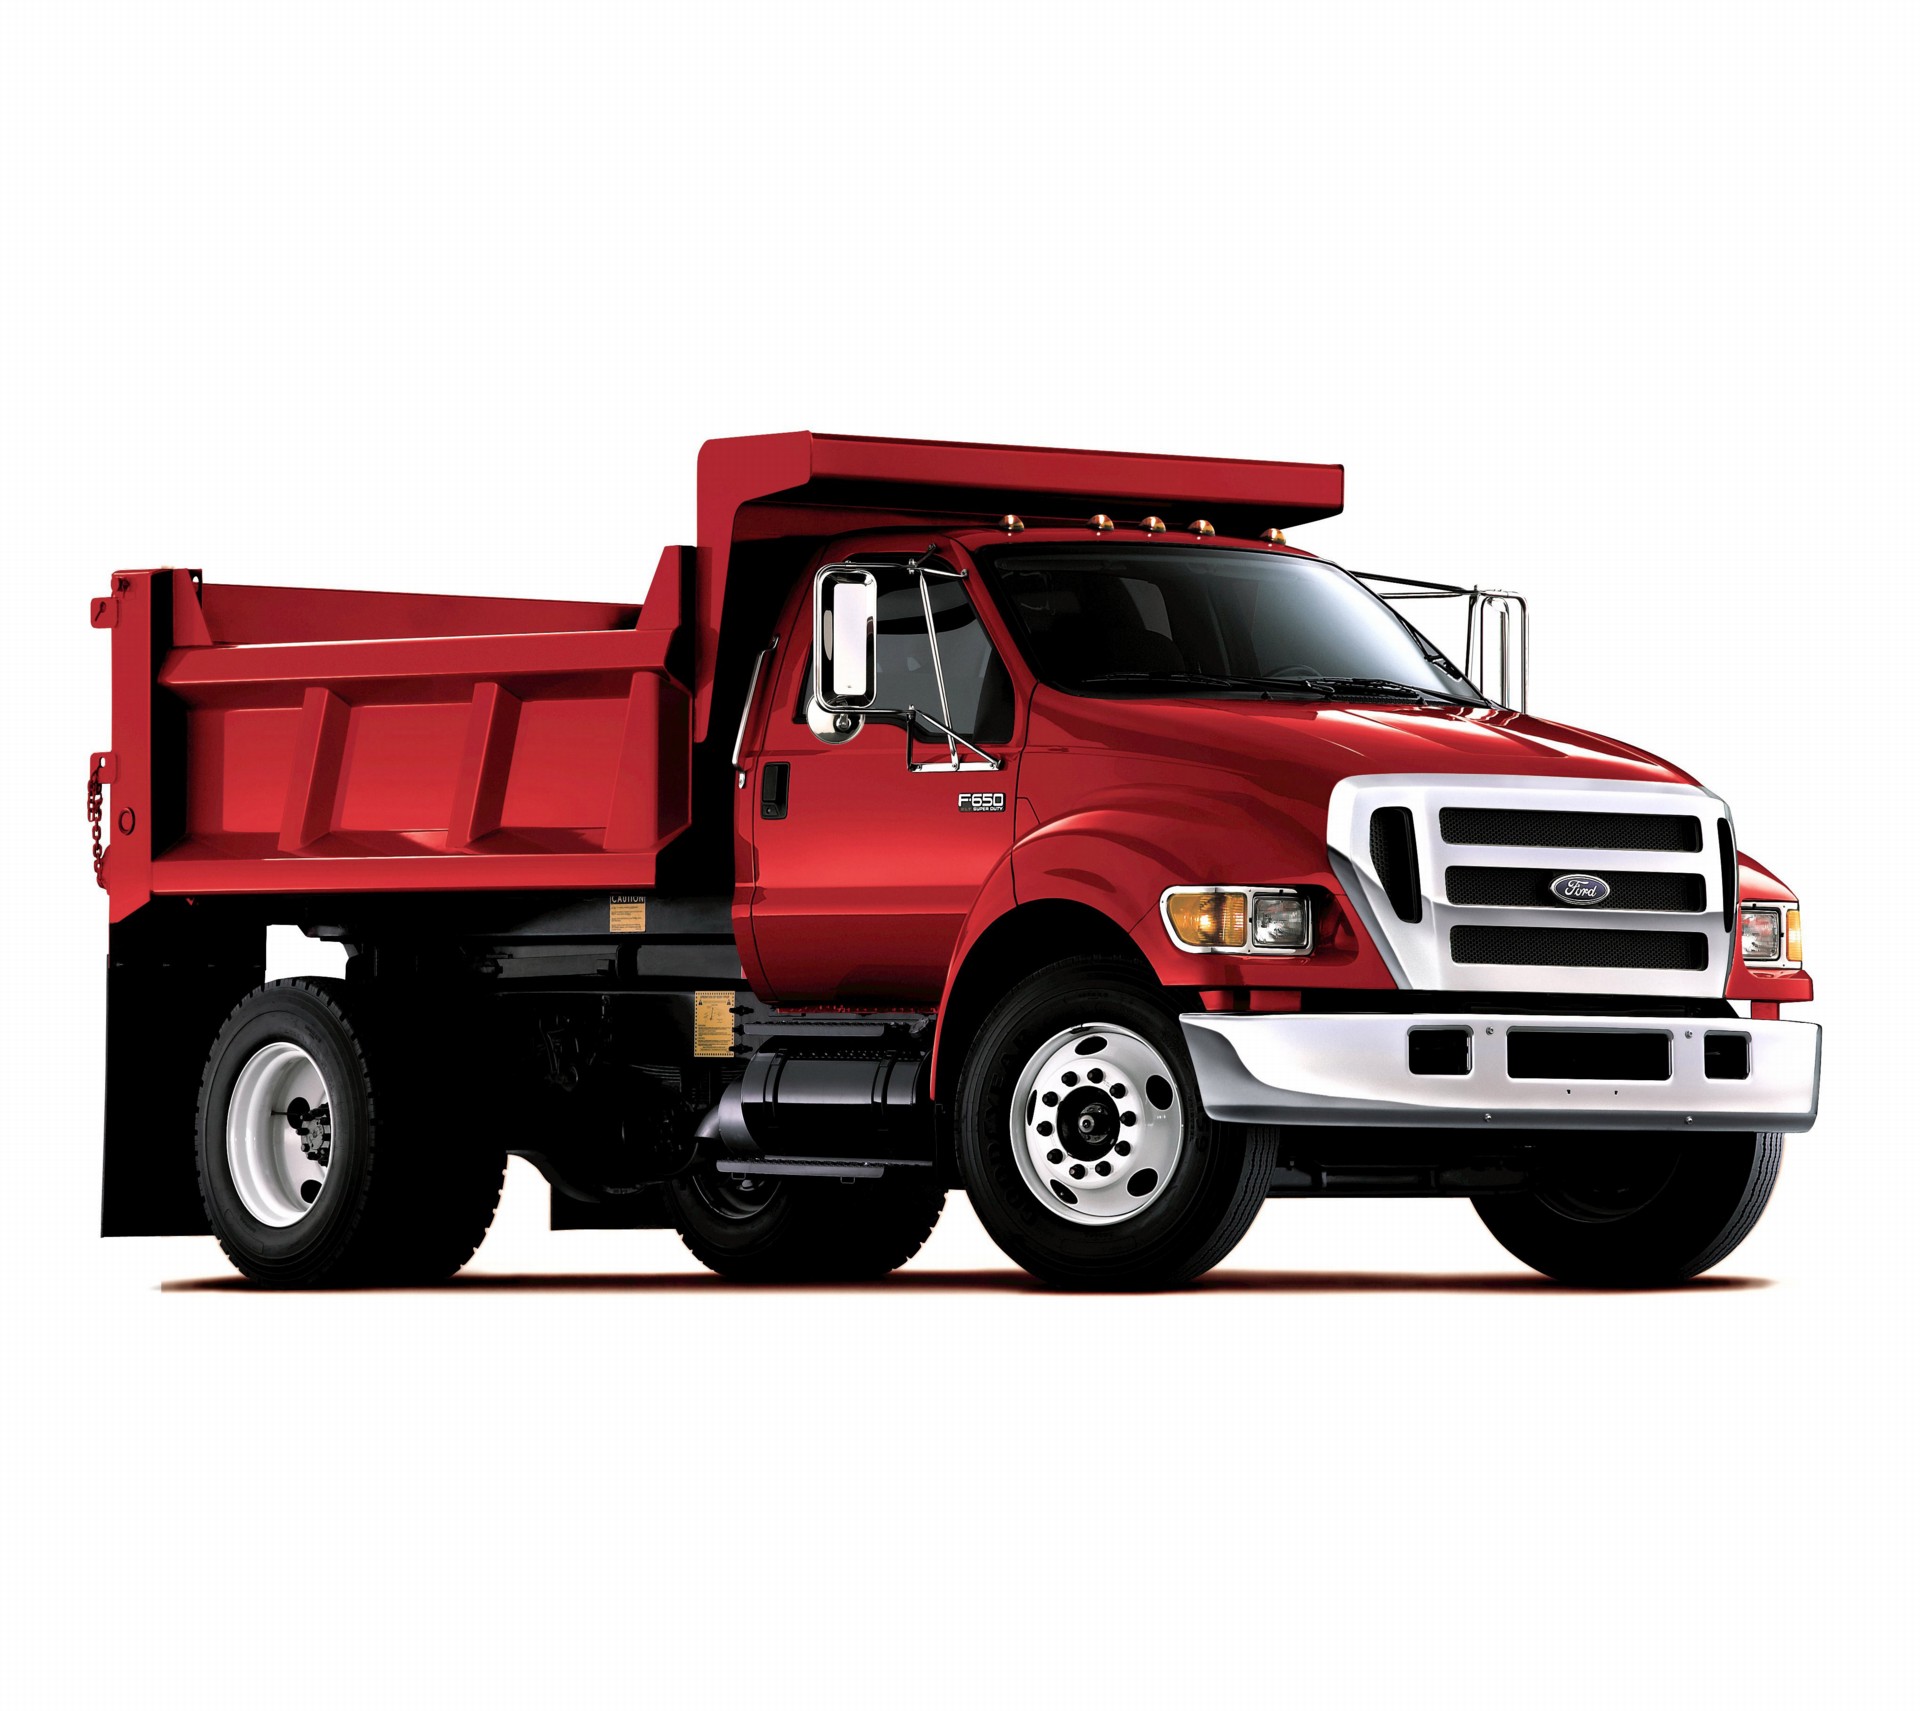 2007 Ford f650 specifications #8